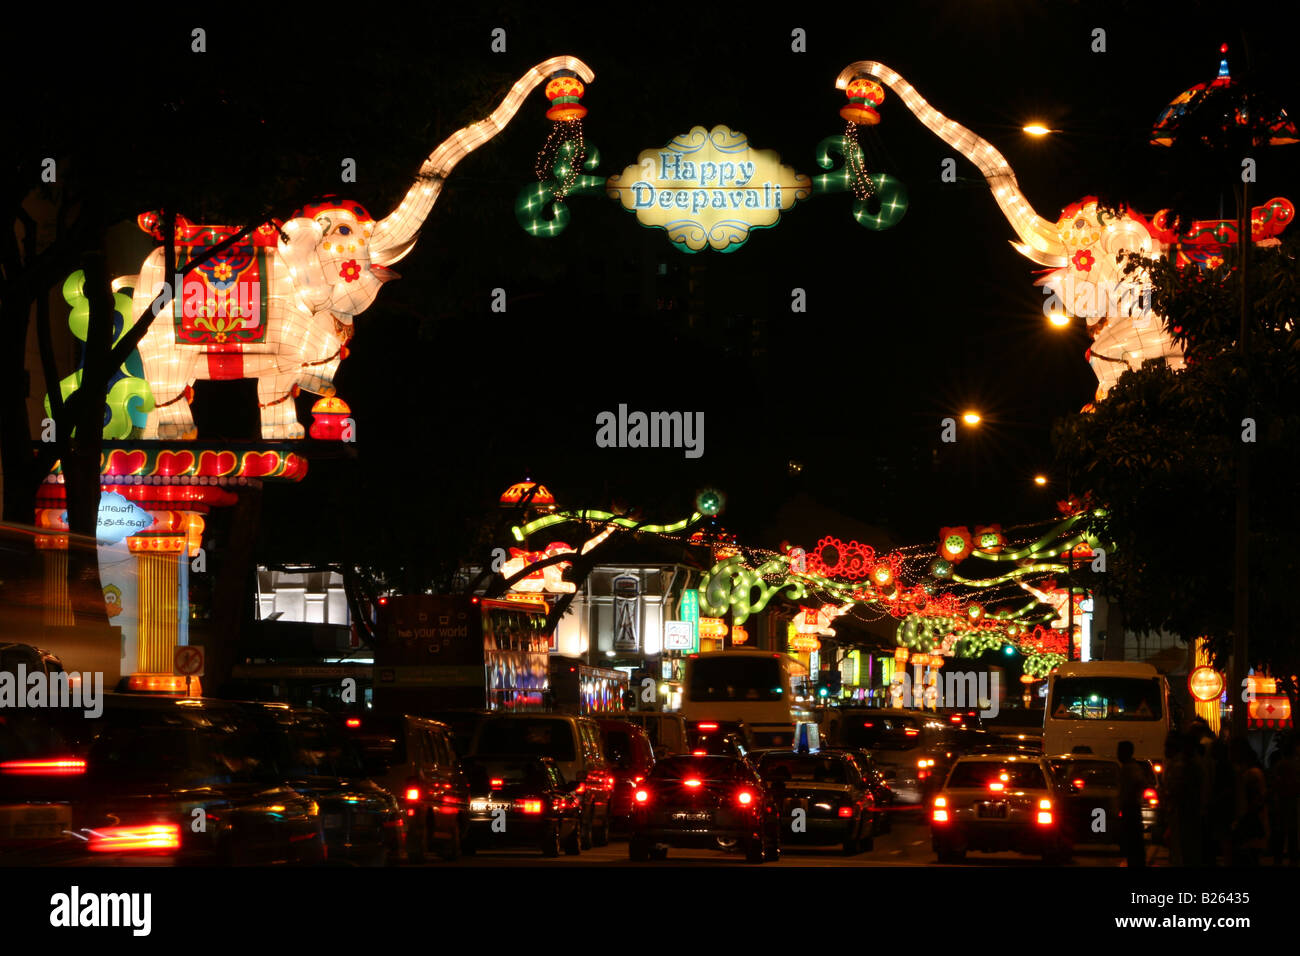 Diwali (Deepavali) the Hindu festival of light is celebrated in Little India, Singapore. Stock Photo